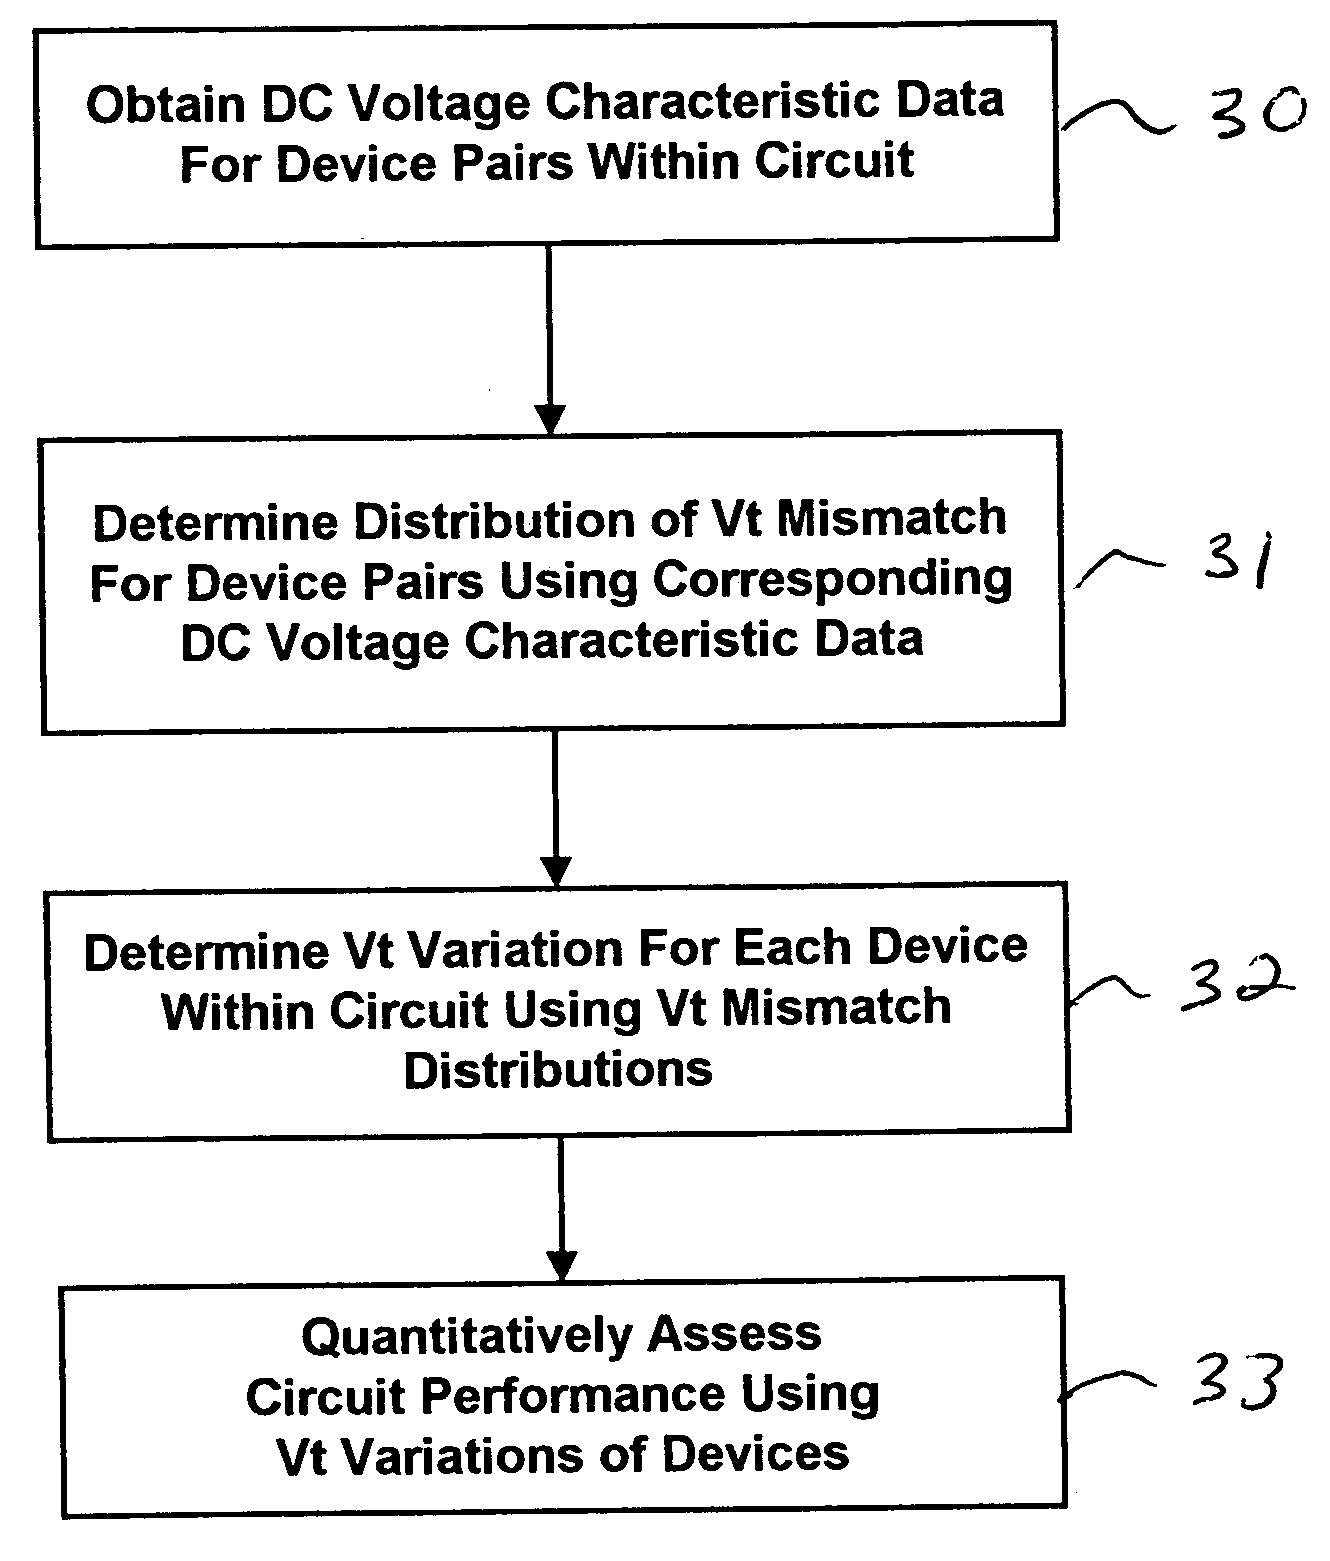 Circuits and methods for characterizing random variations in device characteristics in semiconductor integrated circuits